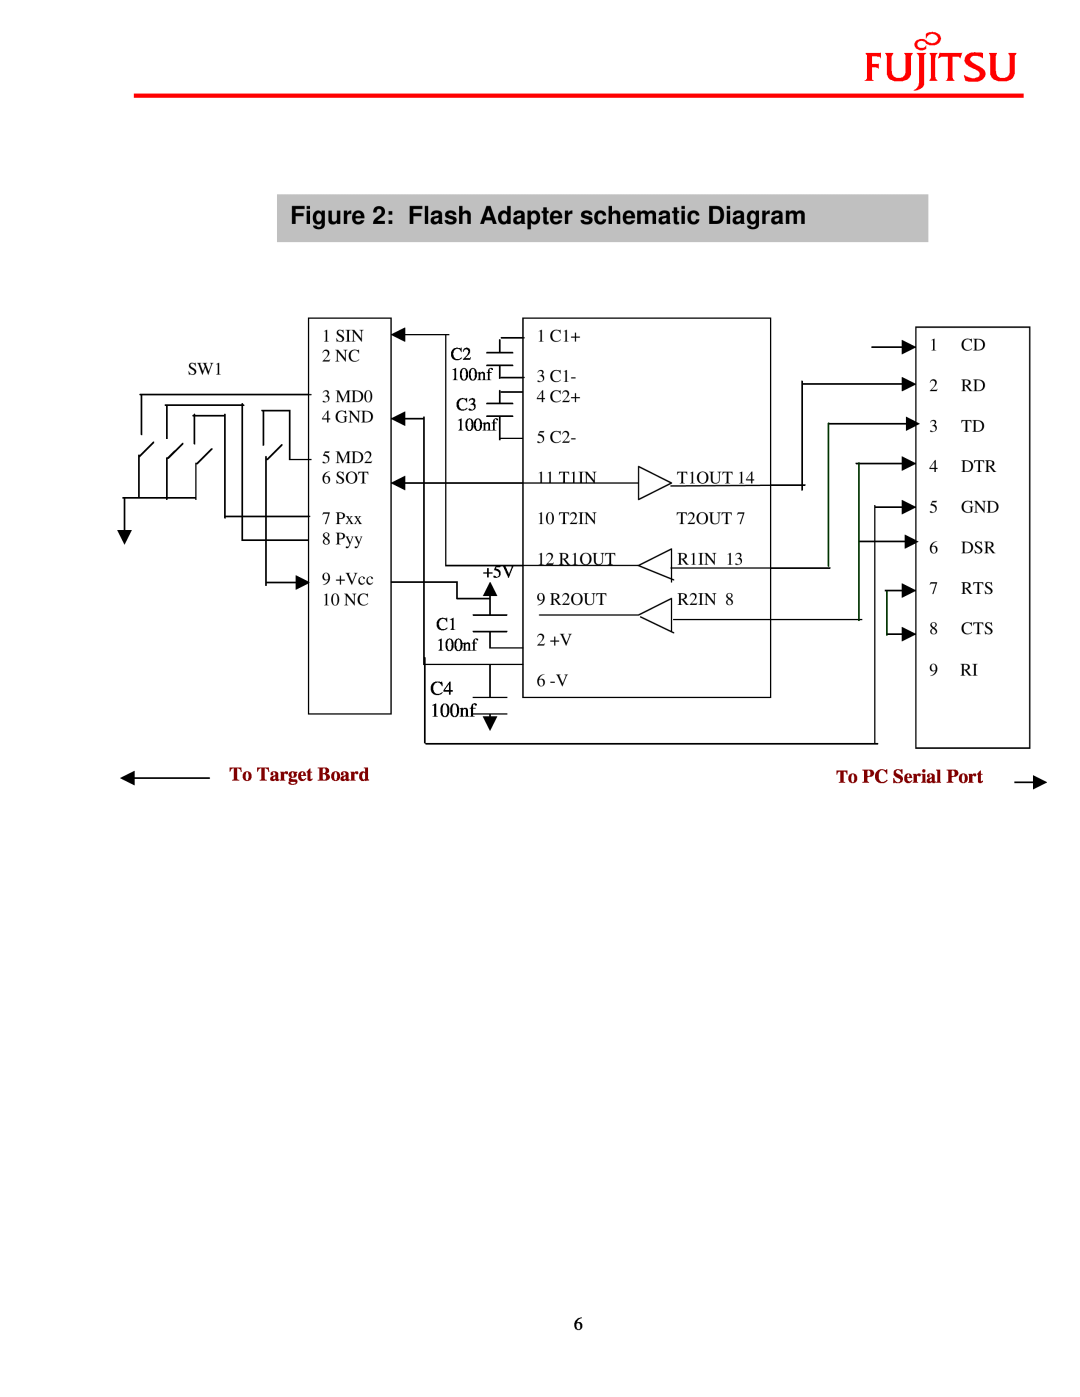 Fujitsu FMC-16LX/FR manual Flash Adapter schematic Diagram, To Target Board, To PC Serial Port 